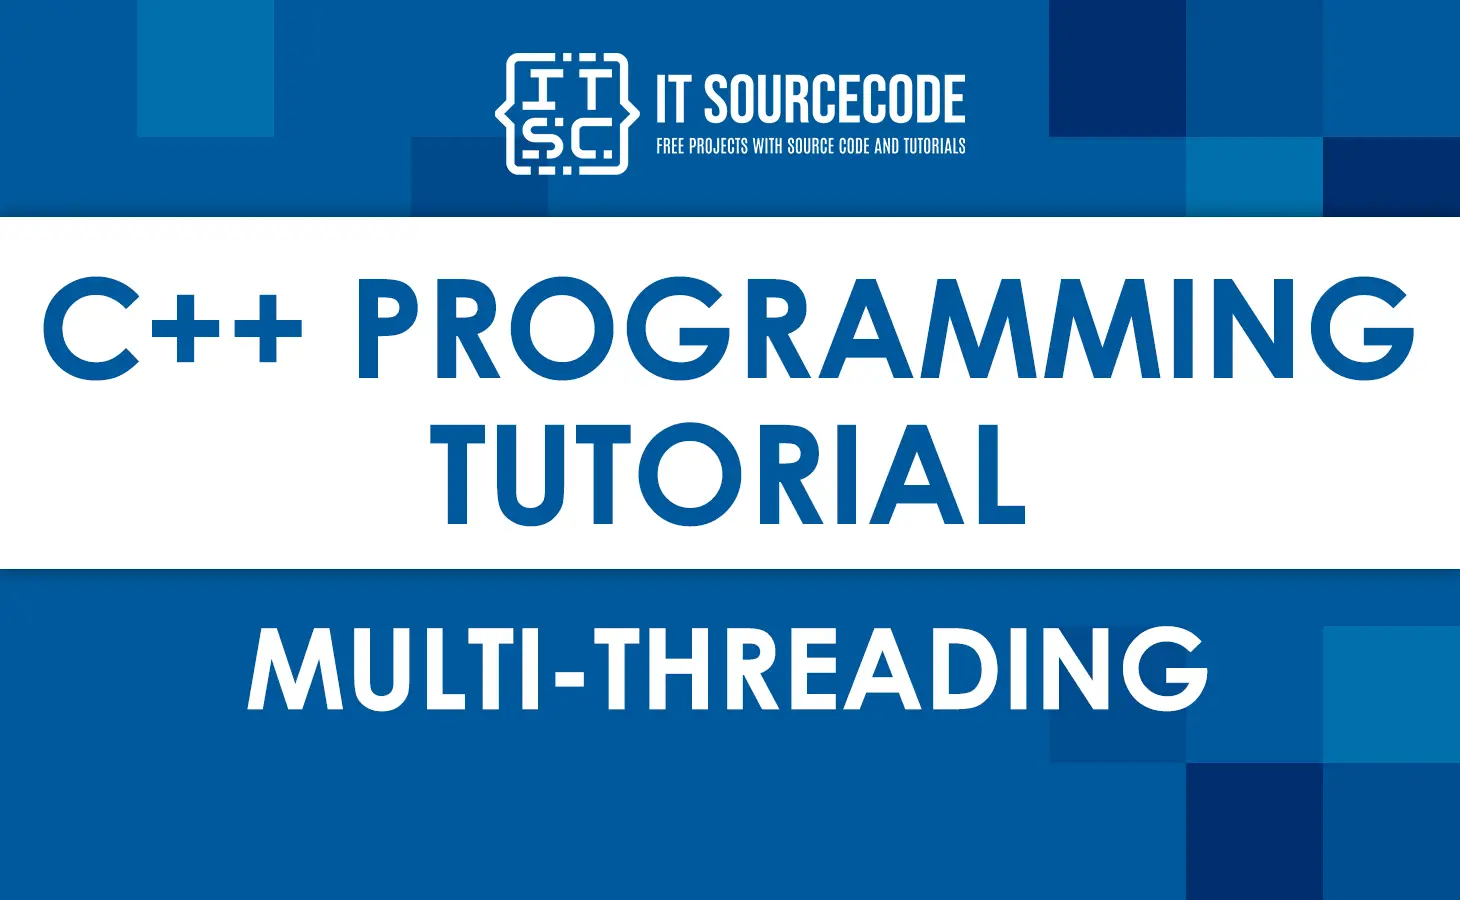 Multithreading in C++ Programming Tutorial with Examples